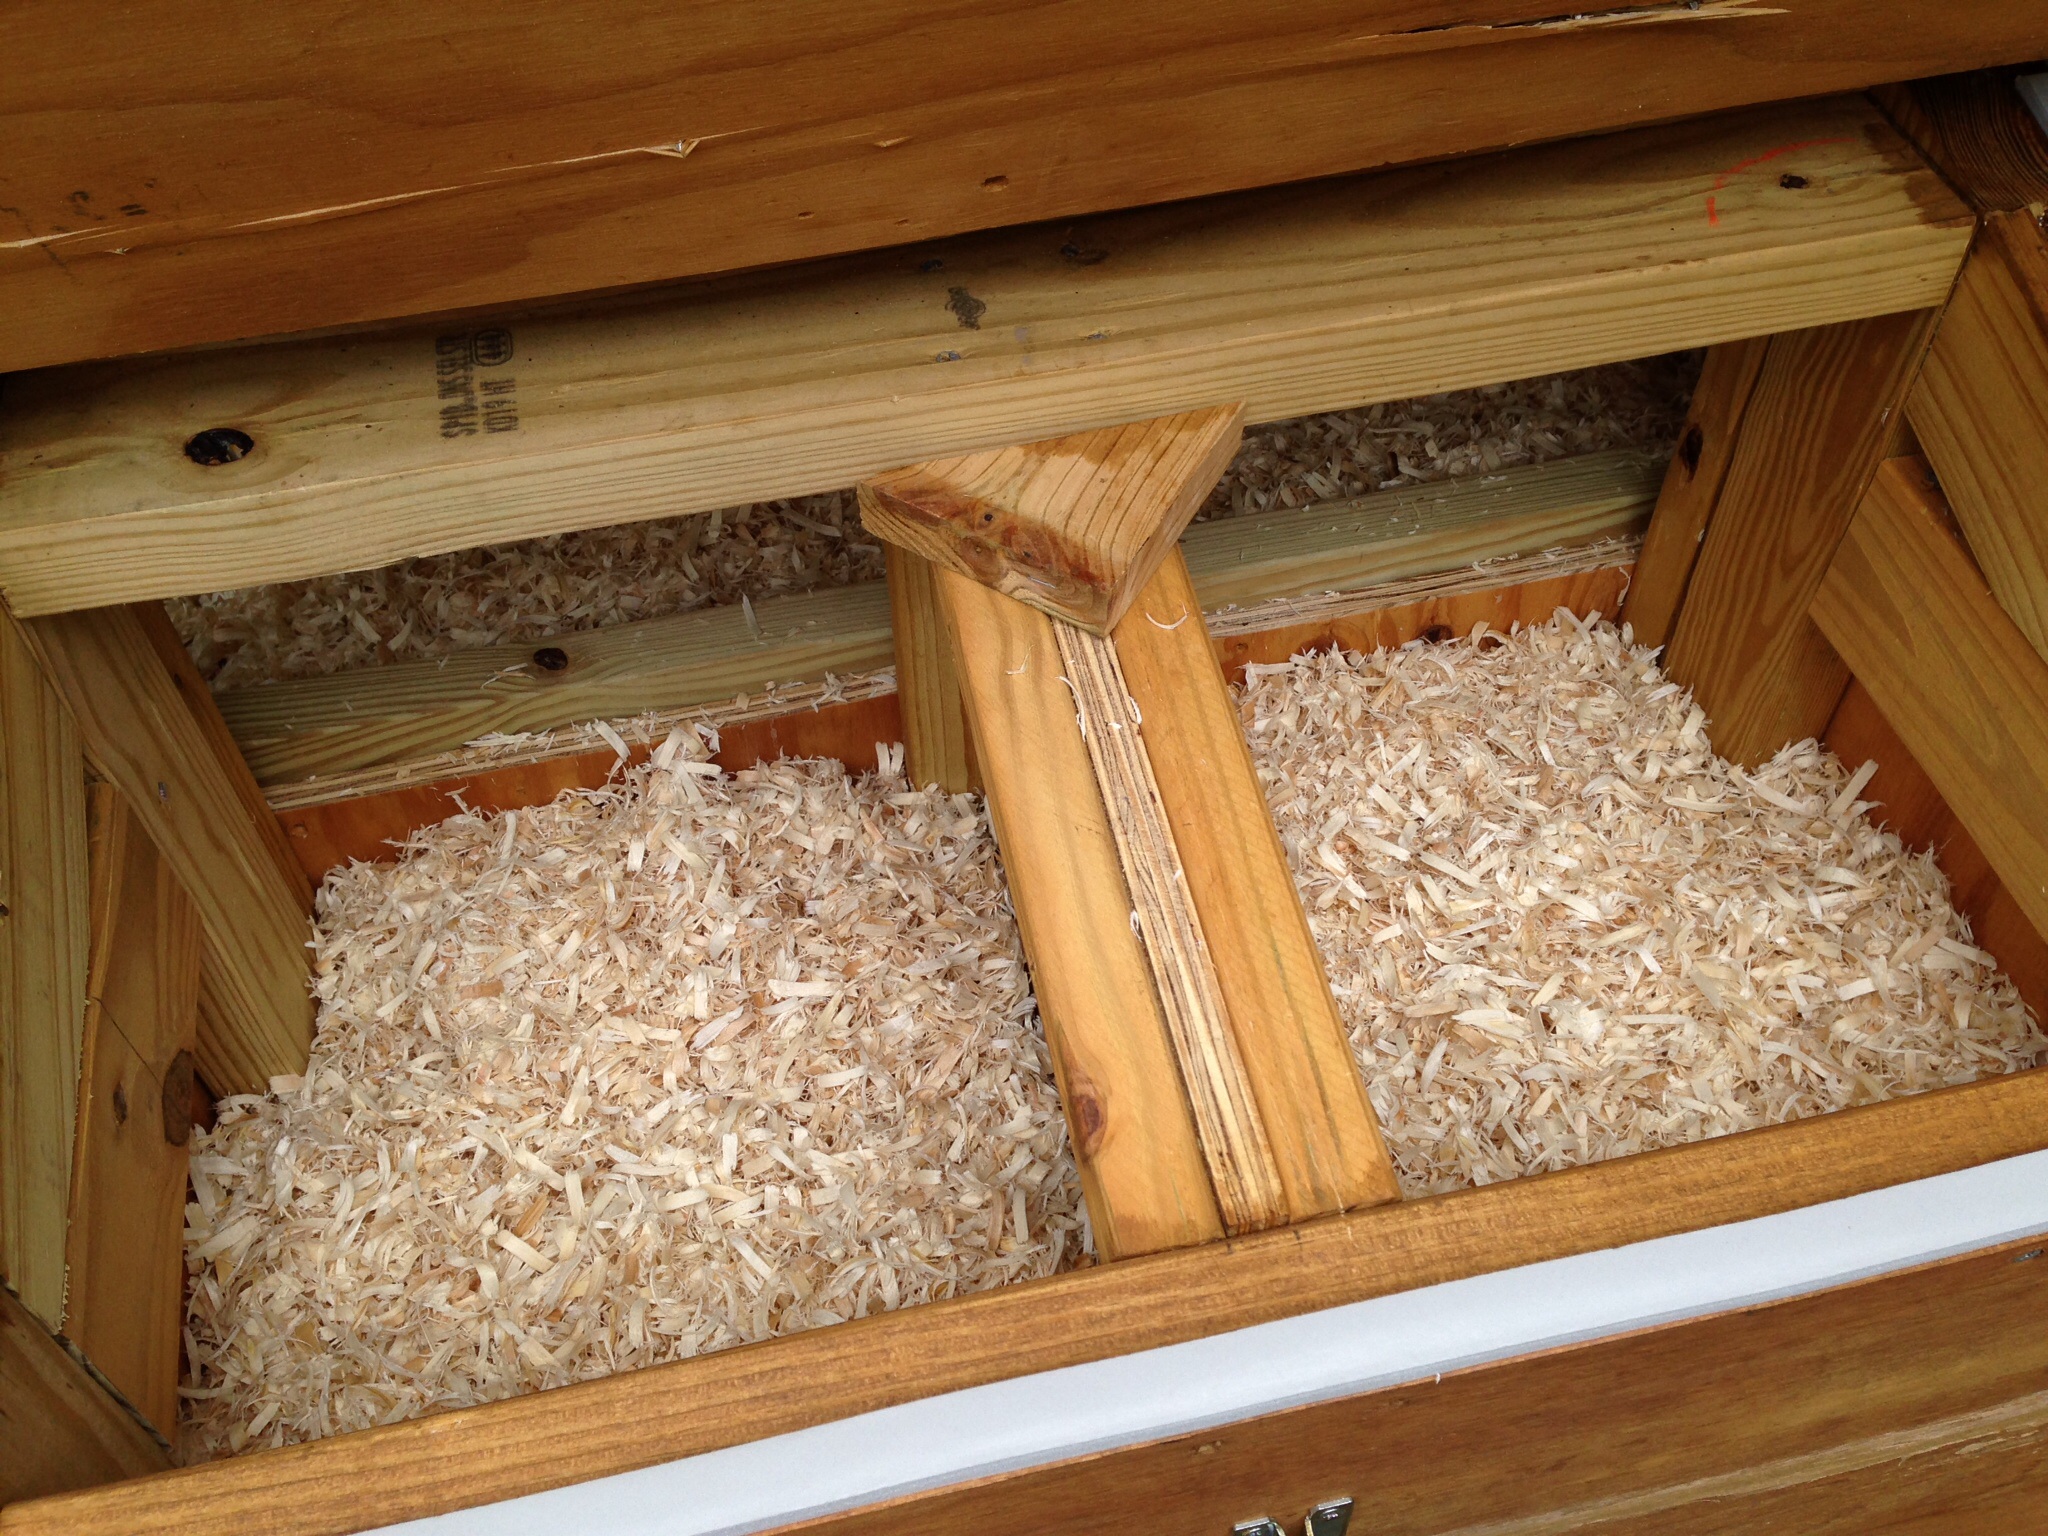 The nesting boxes